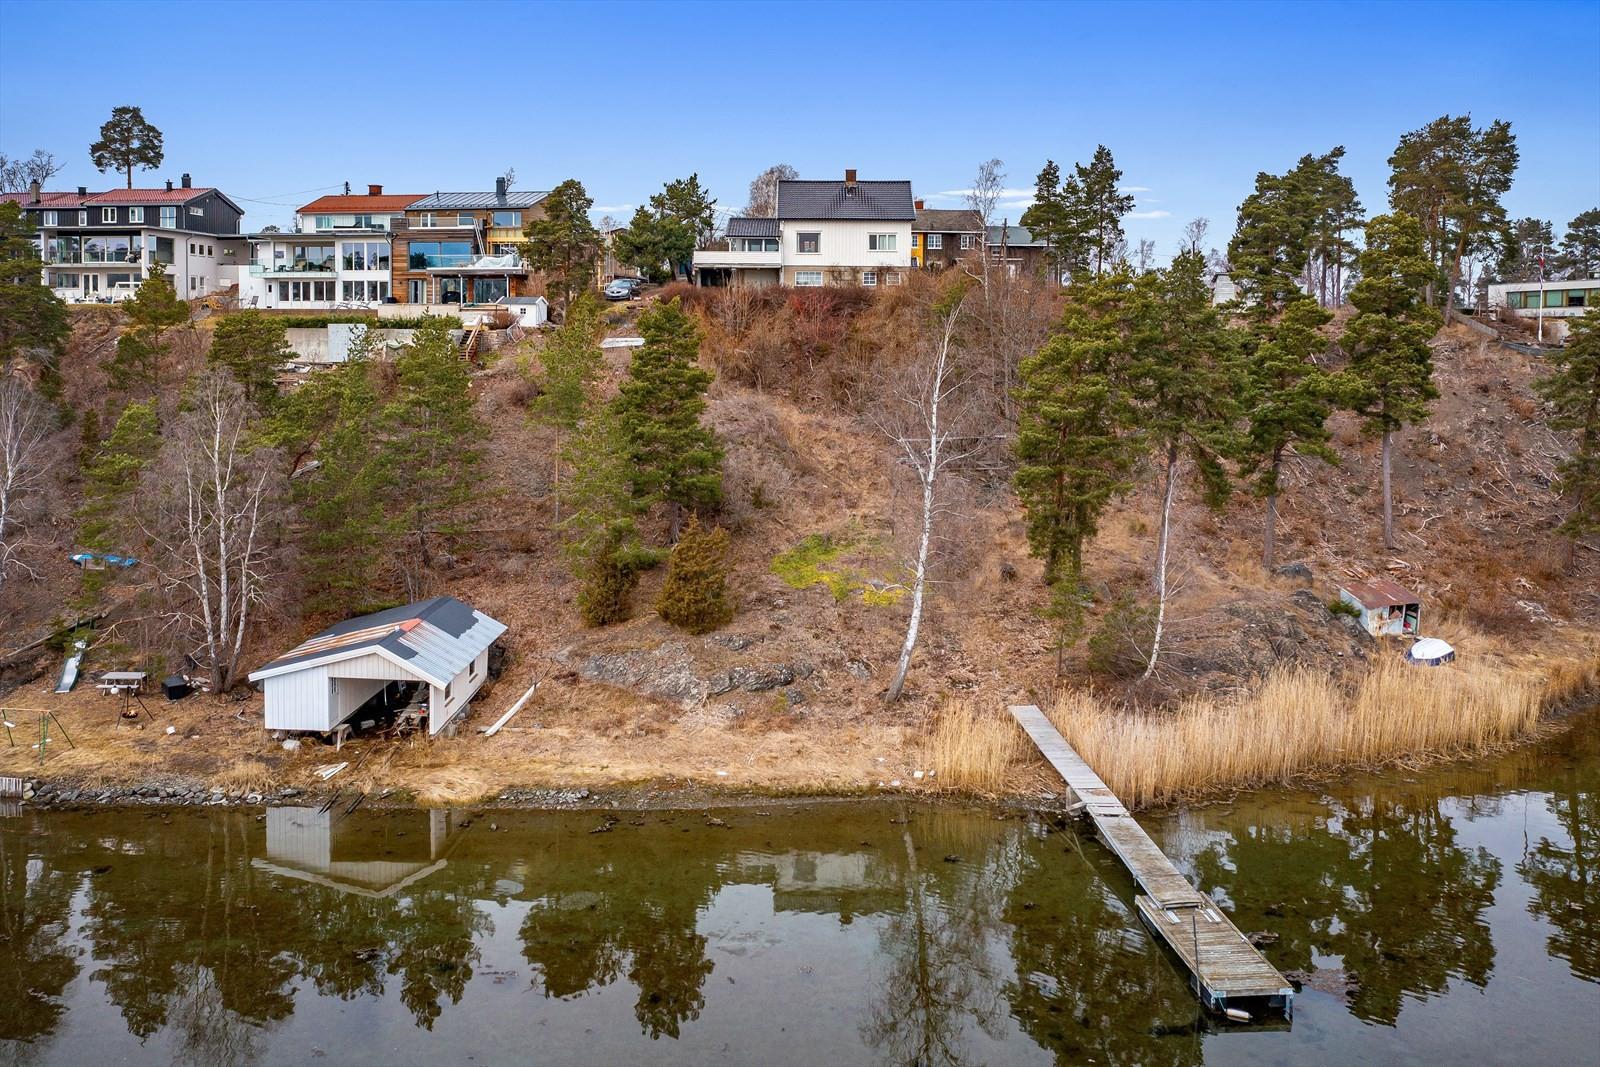 The price is reduced by seven million when the renovated object is put up for sale again in Snarøya - E24